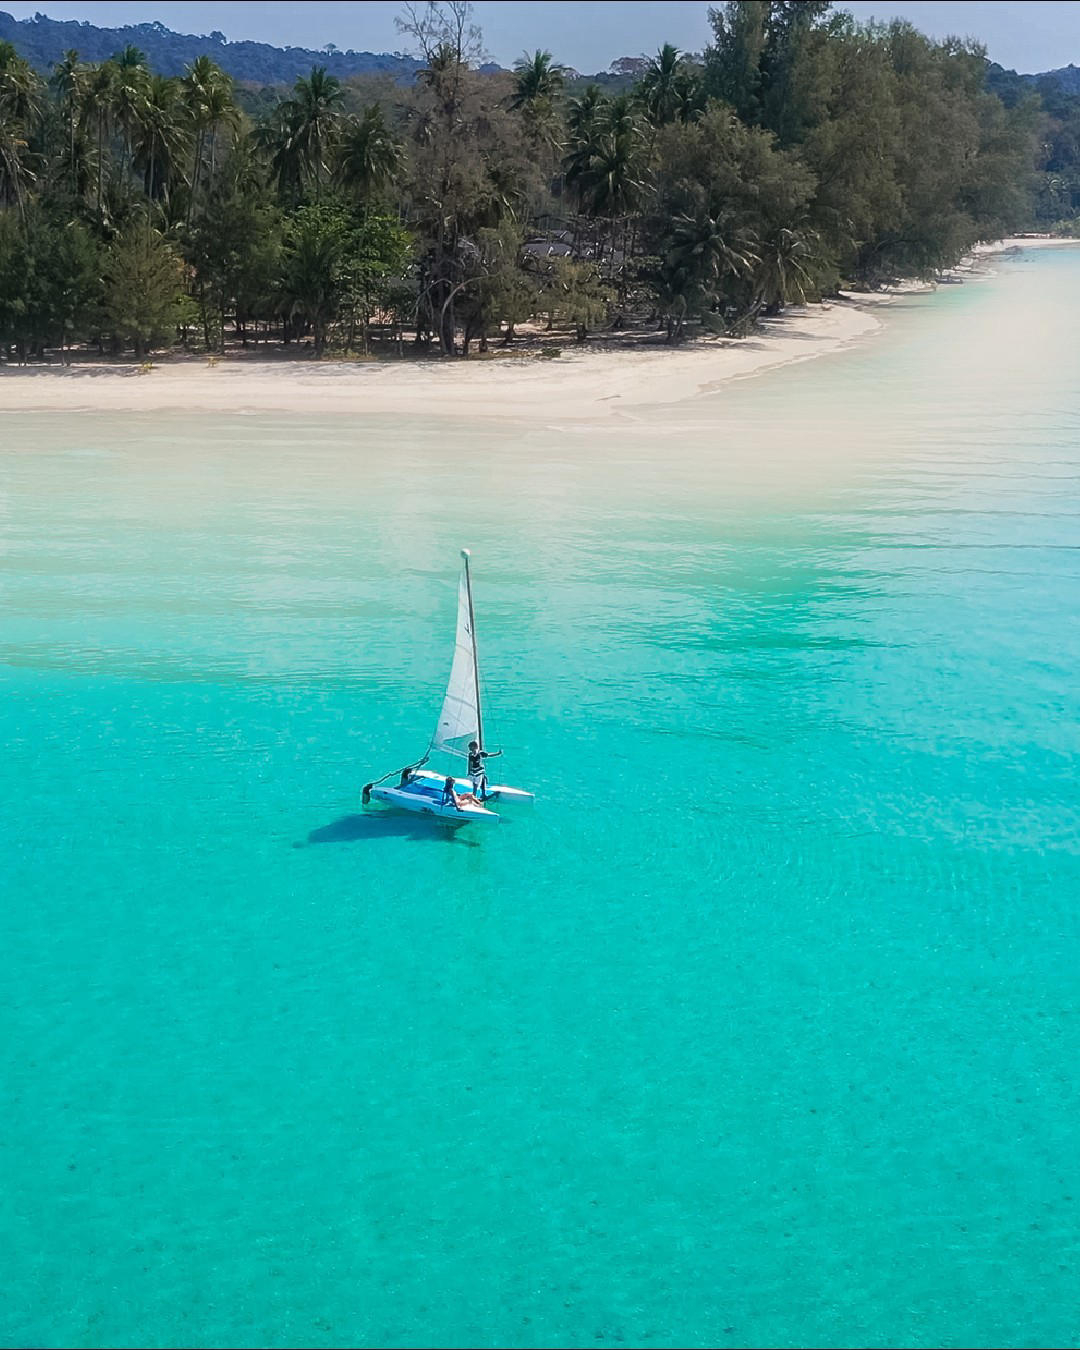 Soneva - Glide across the glass-like sea around #SonevaKiri, a soothing way to spend your days and c